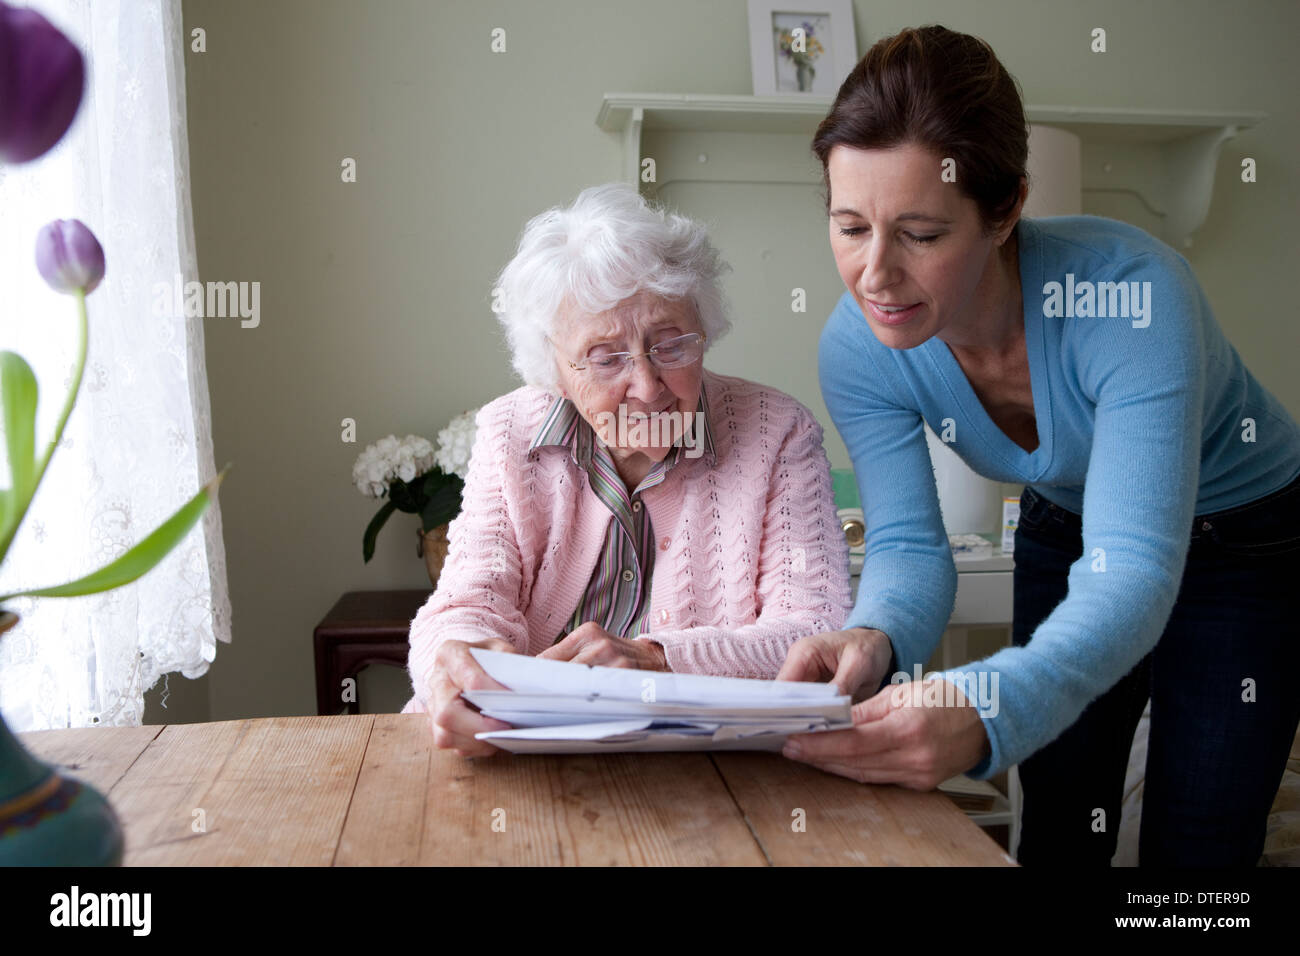 Elderly woman and caregiver reading document Stock Photo